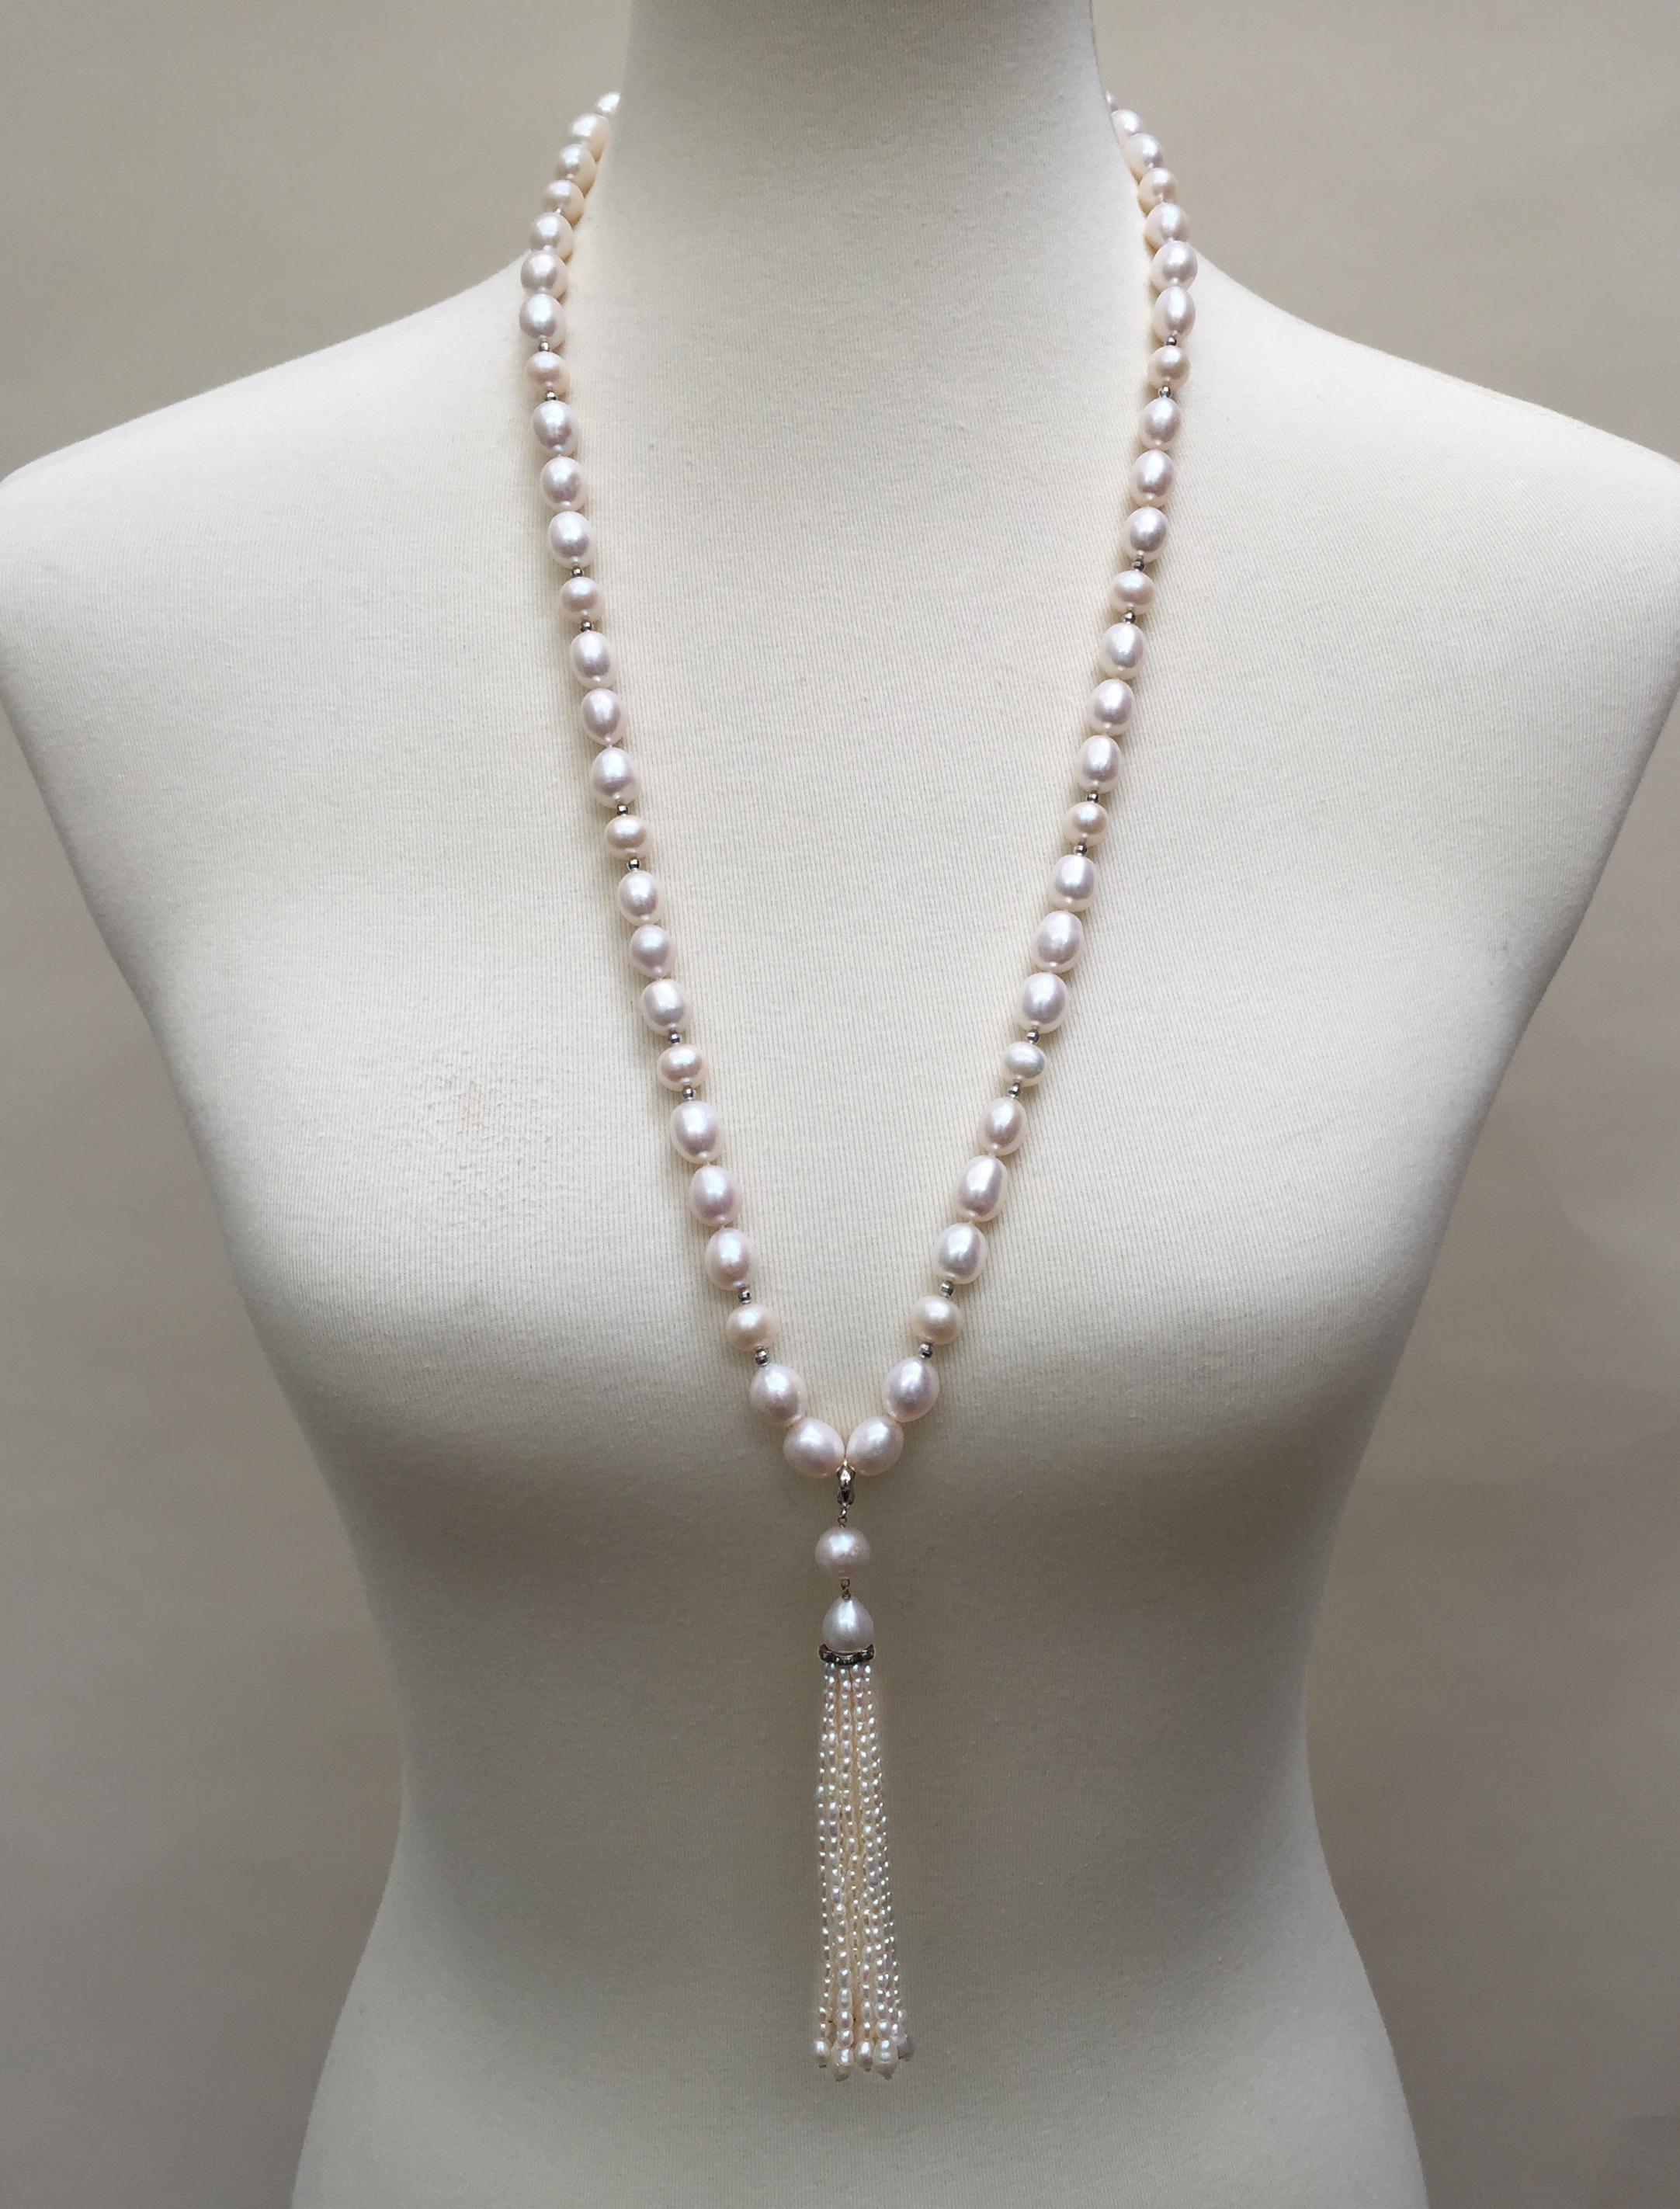 This pearl necklace with pearl and diamond tassel and 14k white gold beads and the clasp is an elegant creation by Marina J. Small 14k white gold faceted beads are strung through the necklace adding a modern twist to the classic pearl necklace. The